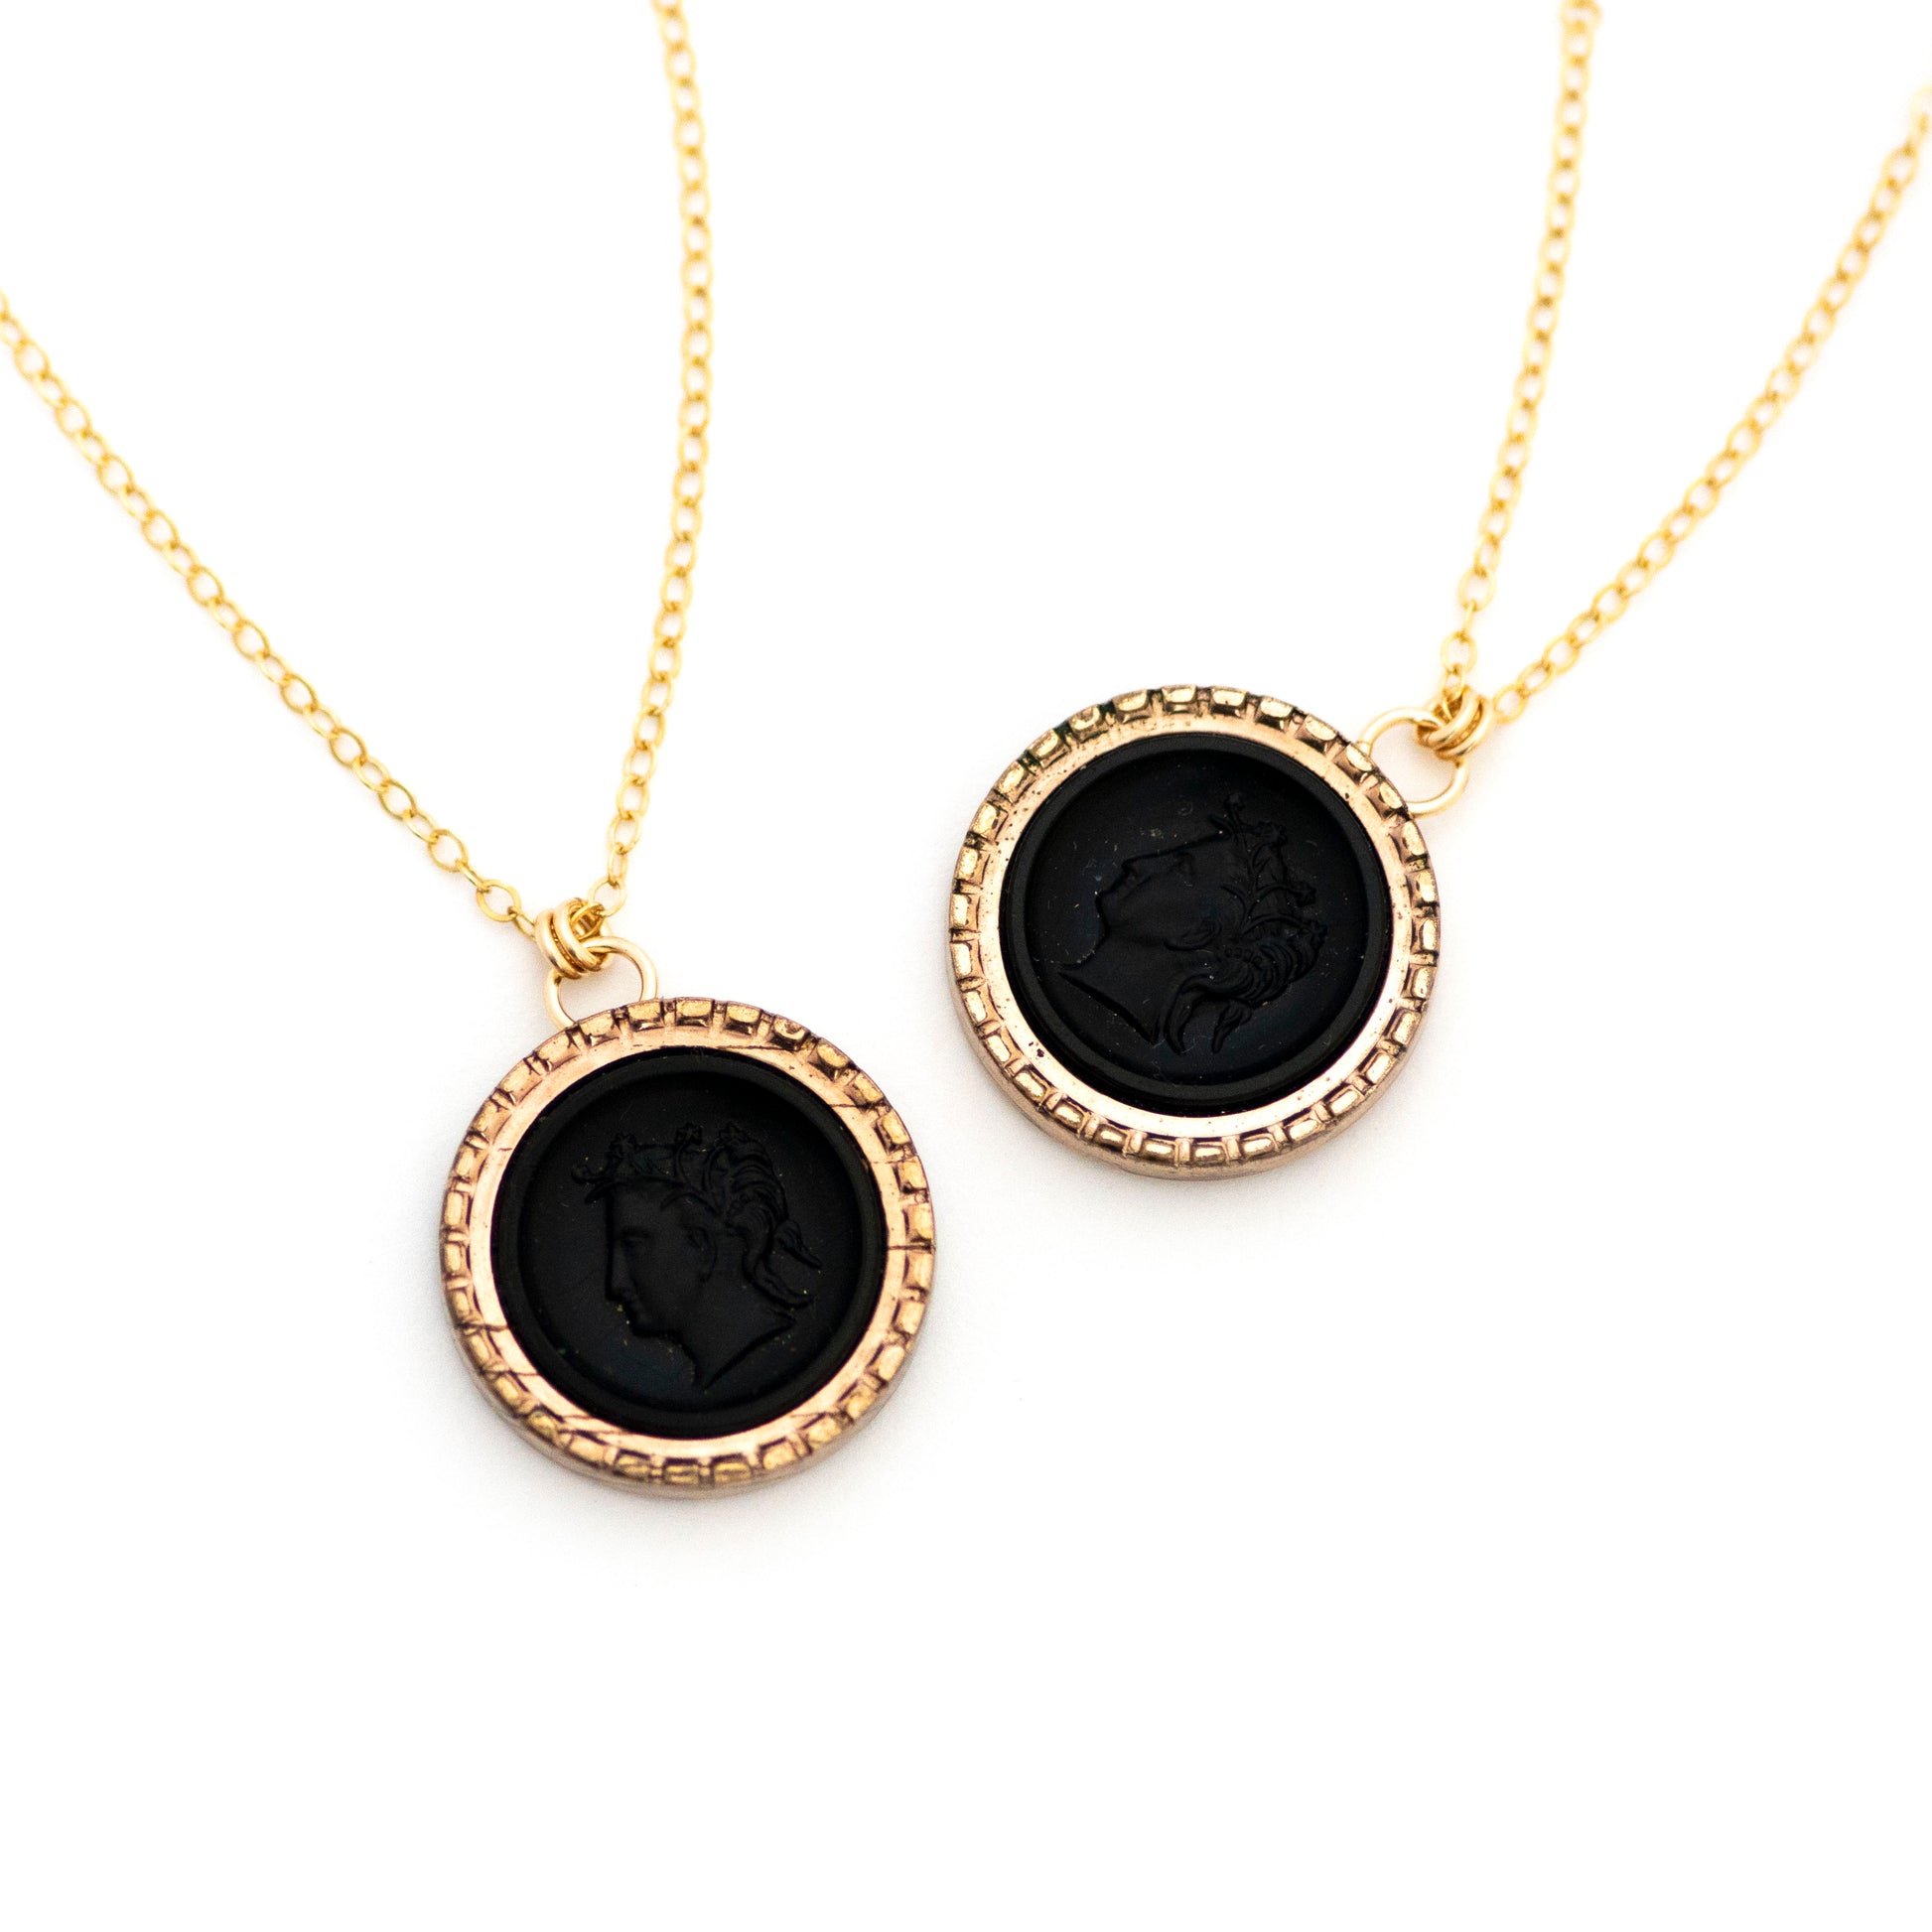 Pair of matching Victorian Black Cameo Cufflink Pendant Necklaces